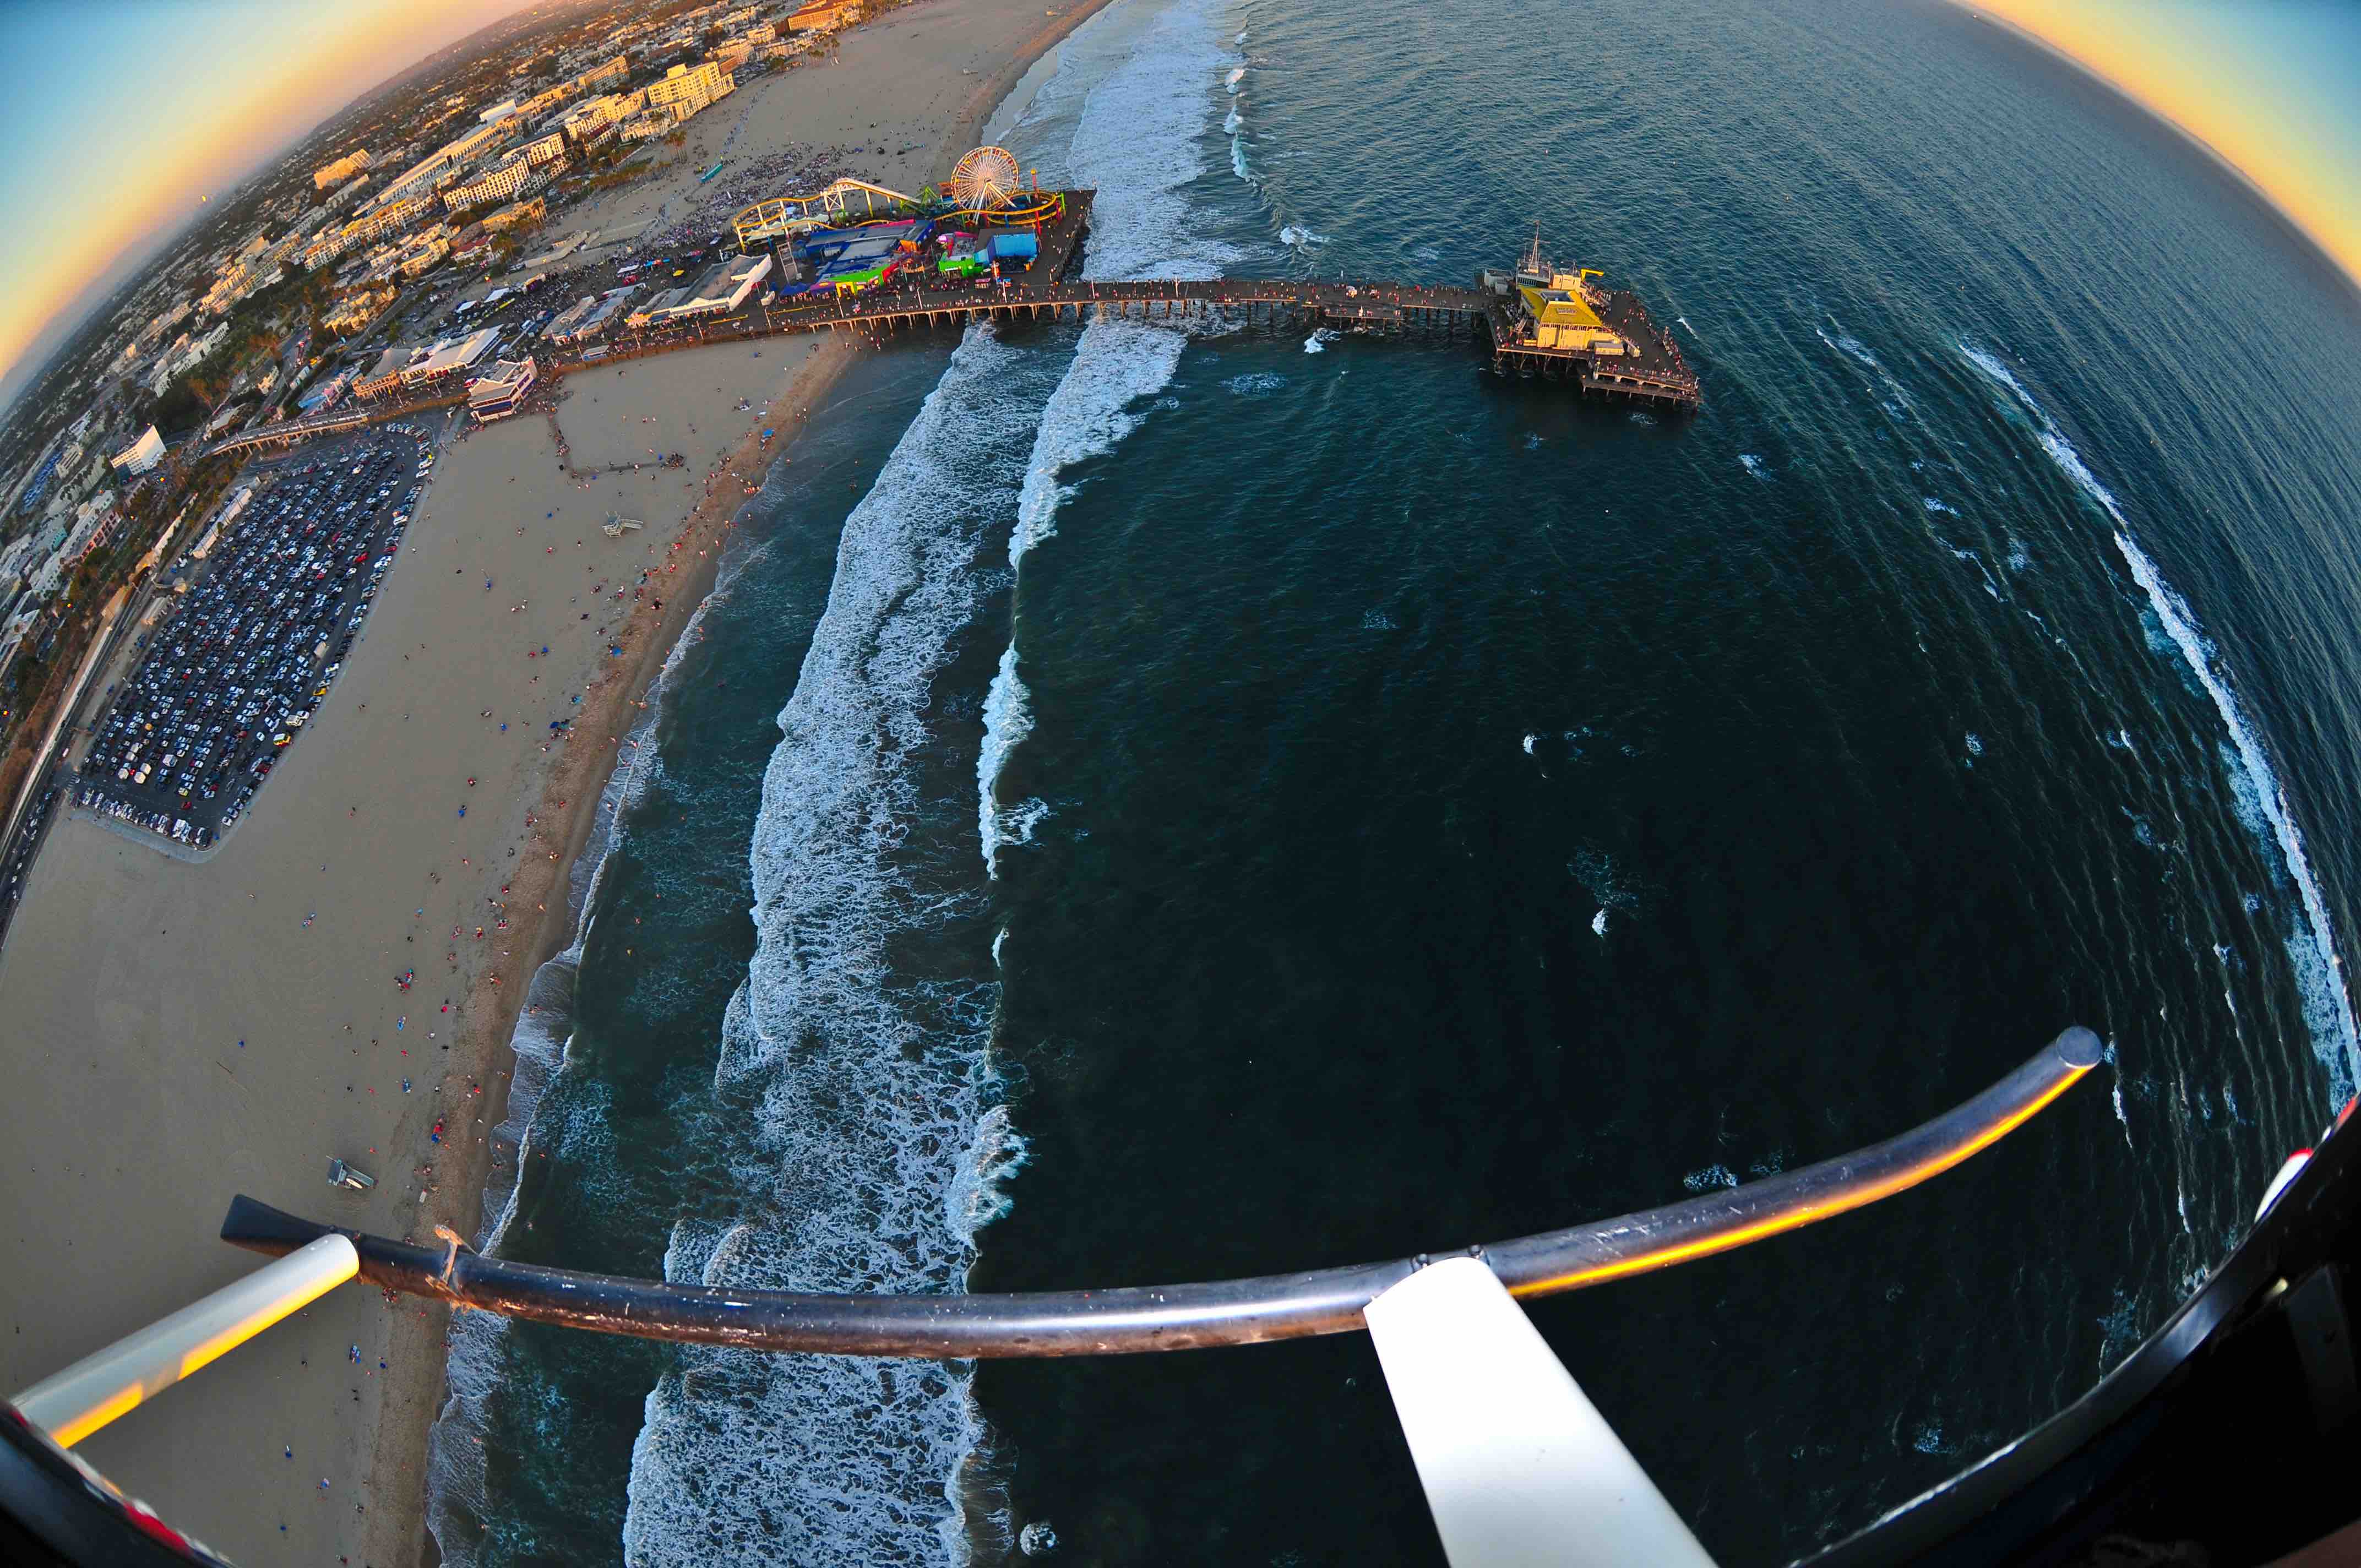 Helicopter flight above Santa Monica, California at sunset. Taking photos of the ocean and the Santa Monica Pier.